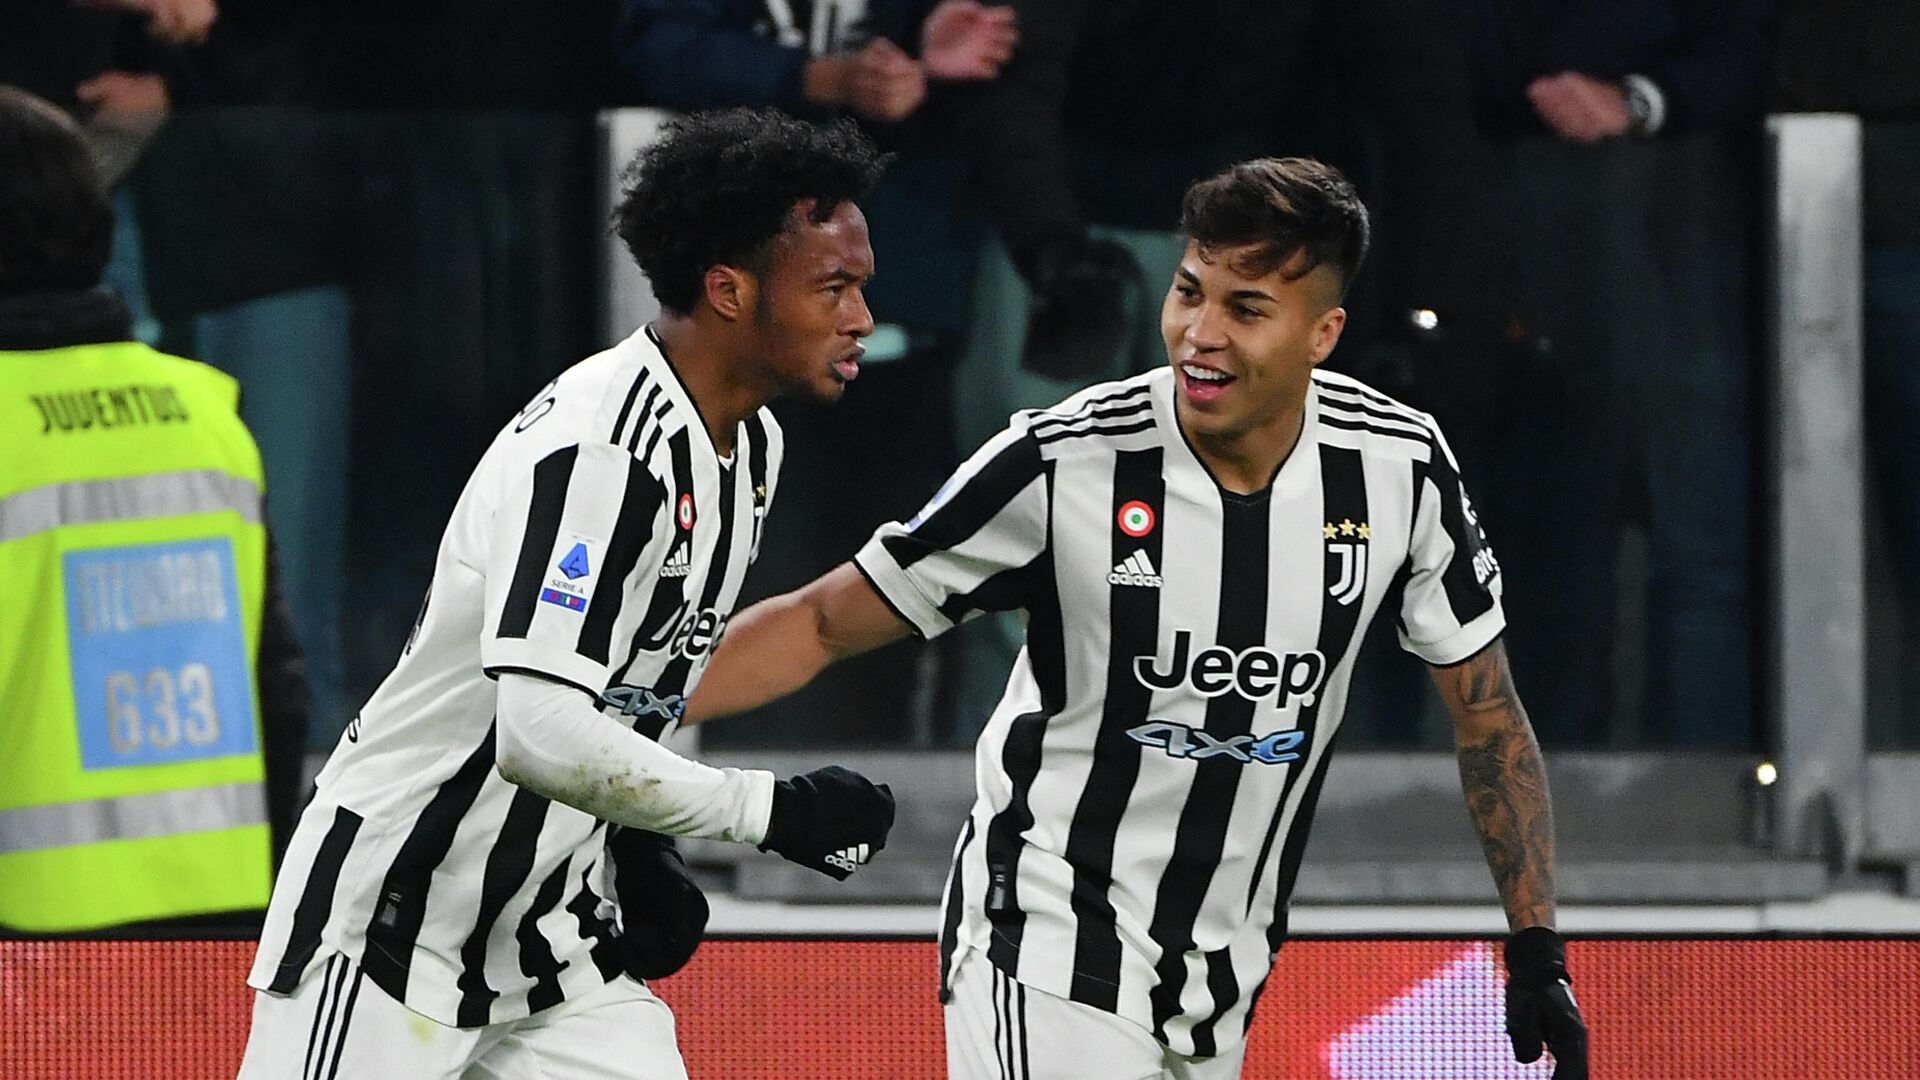 Juventus' Colombian midfielder Juan Cuadrado (L) celebrates with Juventus' Brazilian forward Kaio Jorge after scoring during the Italian Serie A football match between Juventus and Fiorentina on November 6, 2021 at the Juventus stadium in Turin. (Photo by Isabella BONOTTO / AFP) - РИА Новости, 1920, 06.11.2021